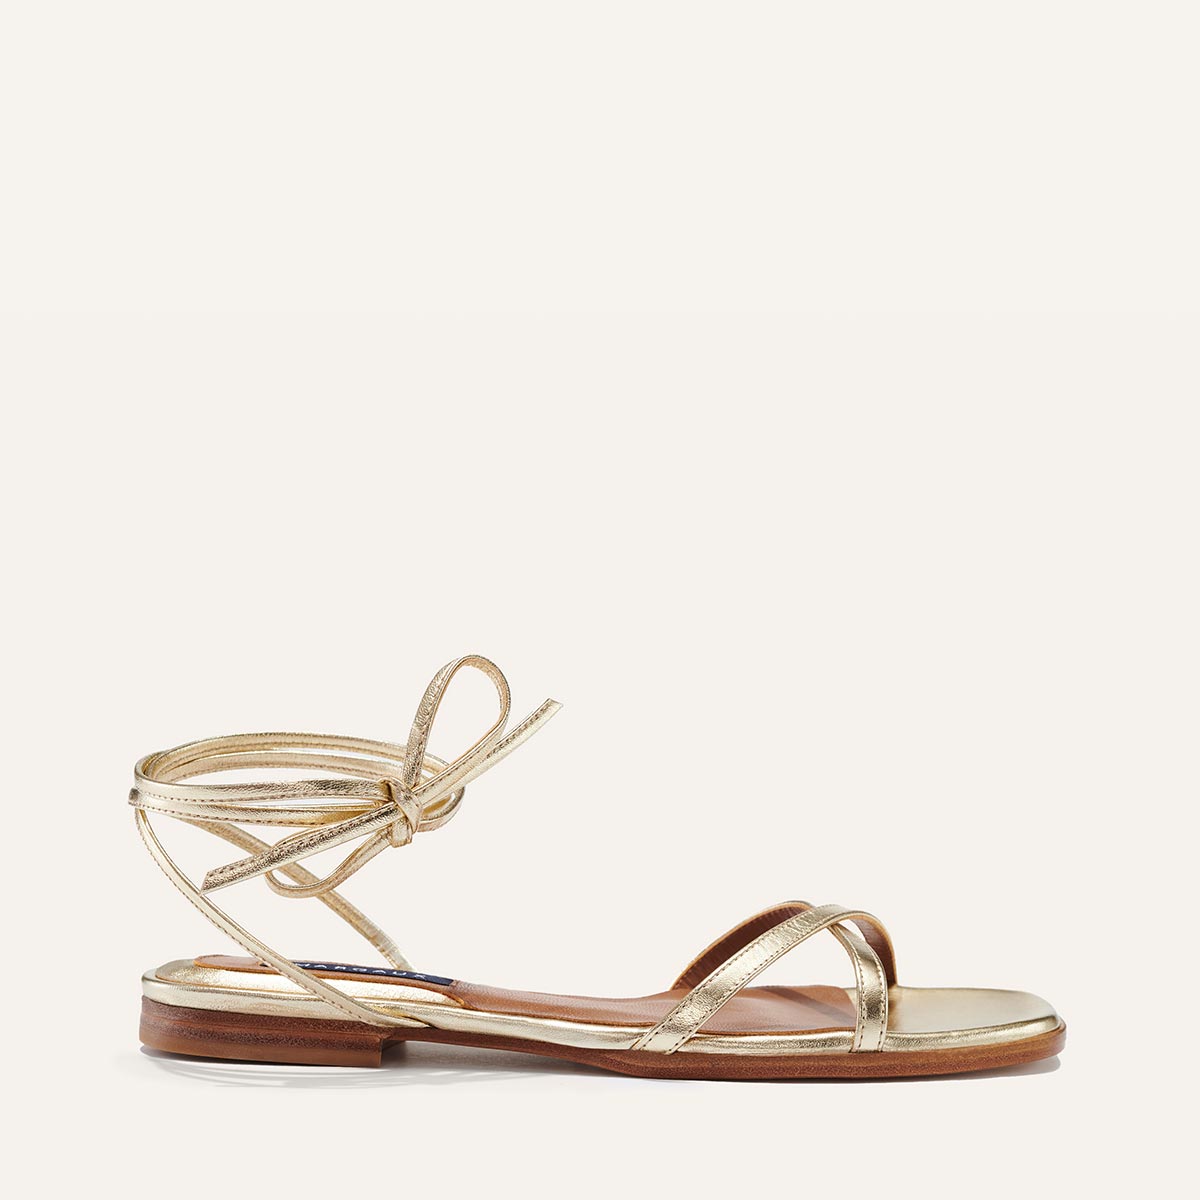 Margaux's classic strappy Wrap Sandal with ankle ties, made in Spain from soft, champagne metallic Italian nappa leather